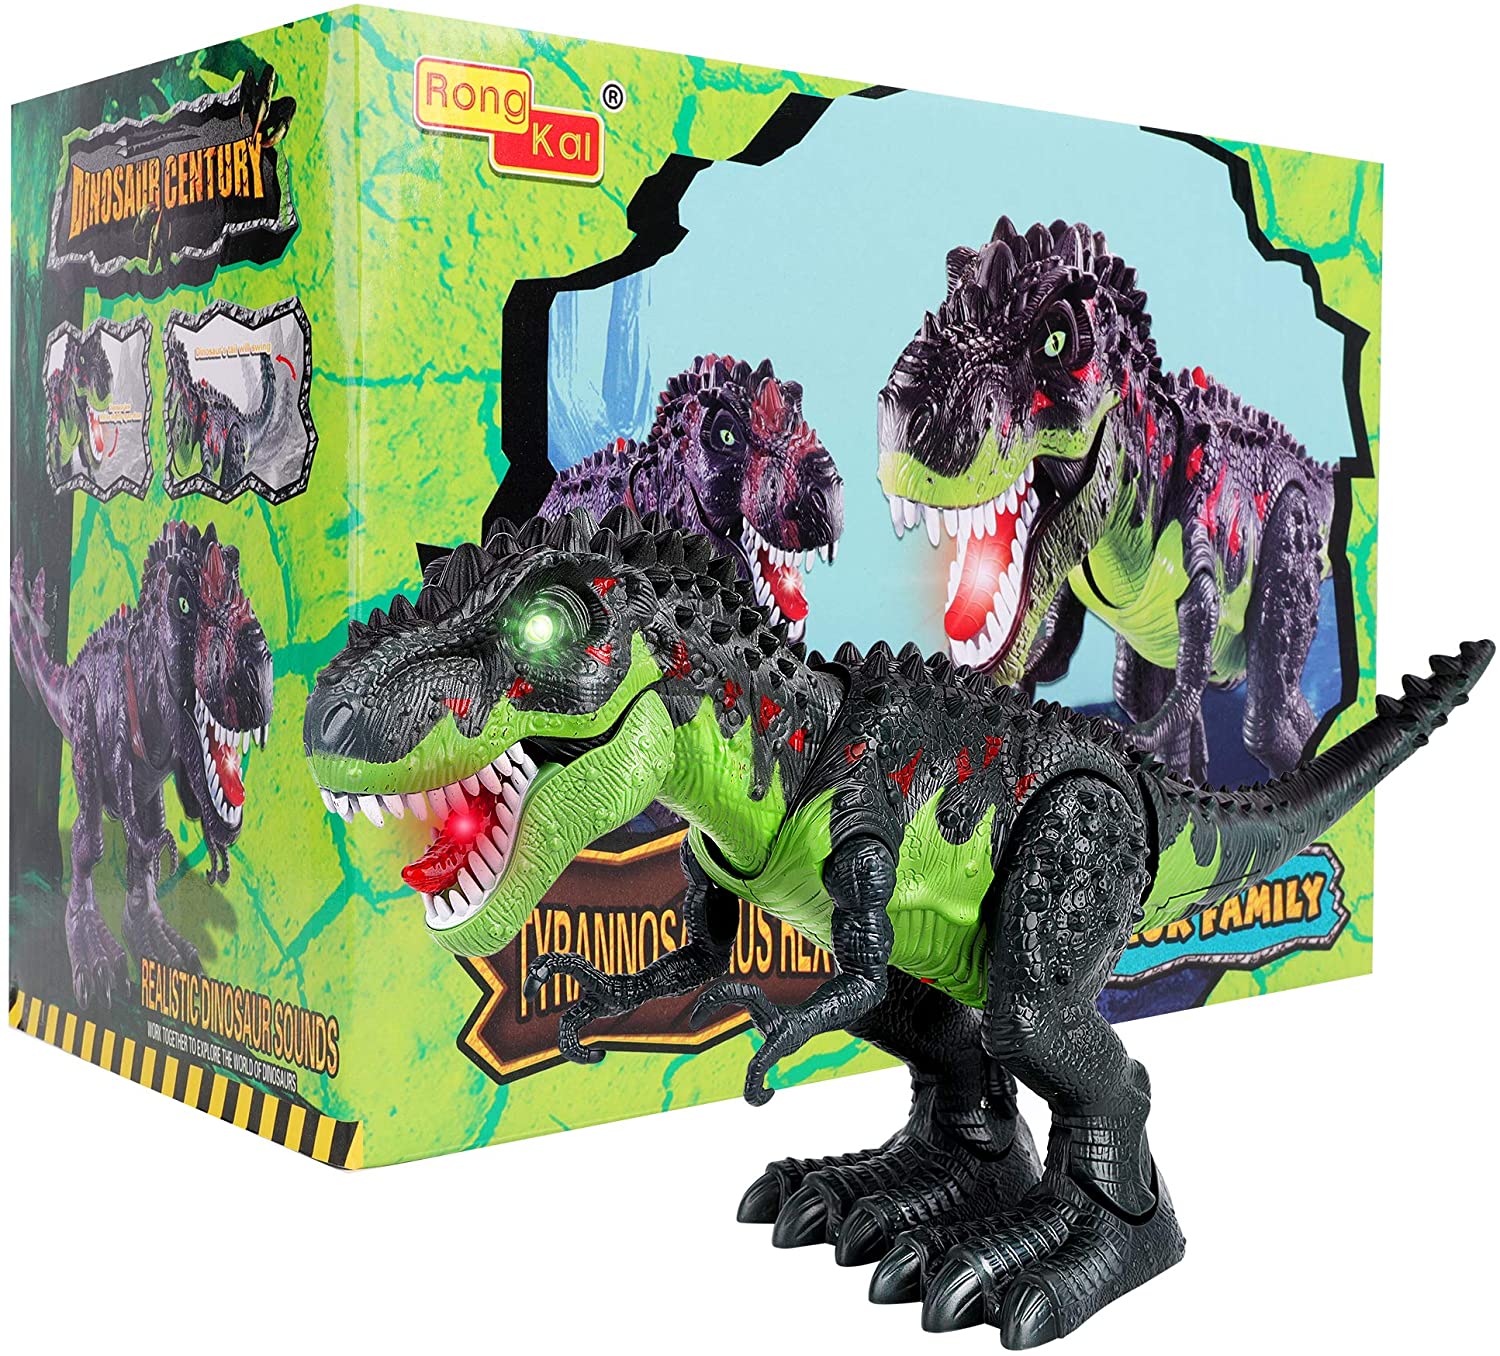 Rong Kai Tyrannosurus Rex Dinosaur Family with LED Light, Realistic T-Rex Dinosaur Toy with Light Up, for Kids and...